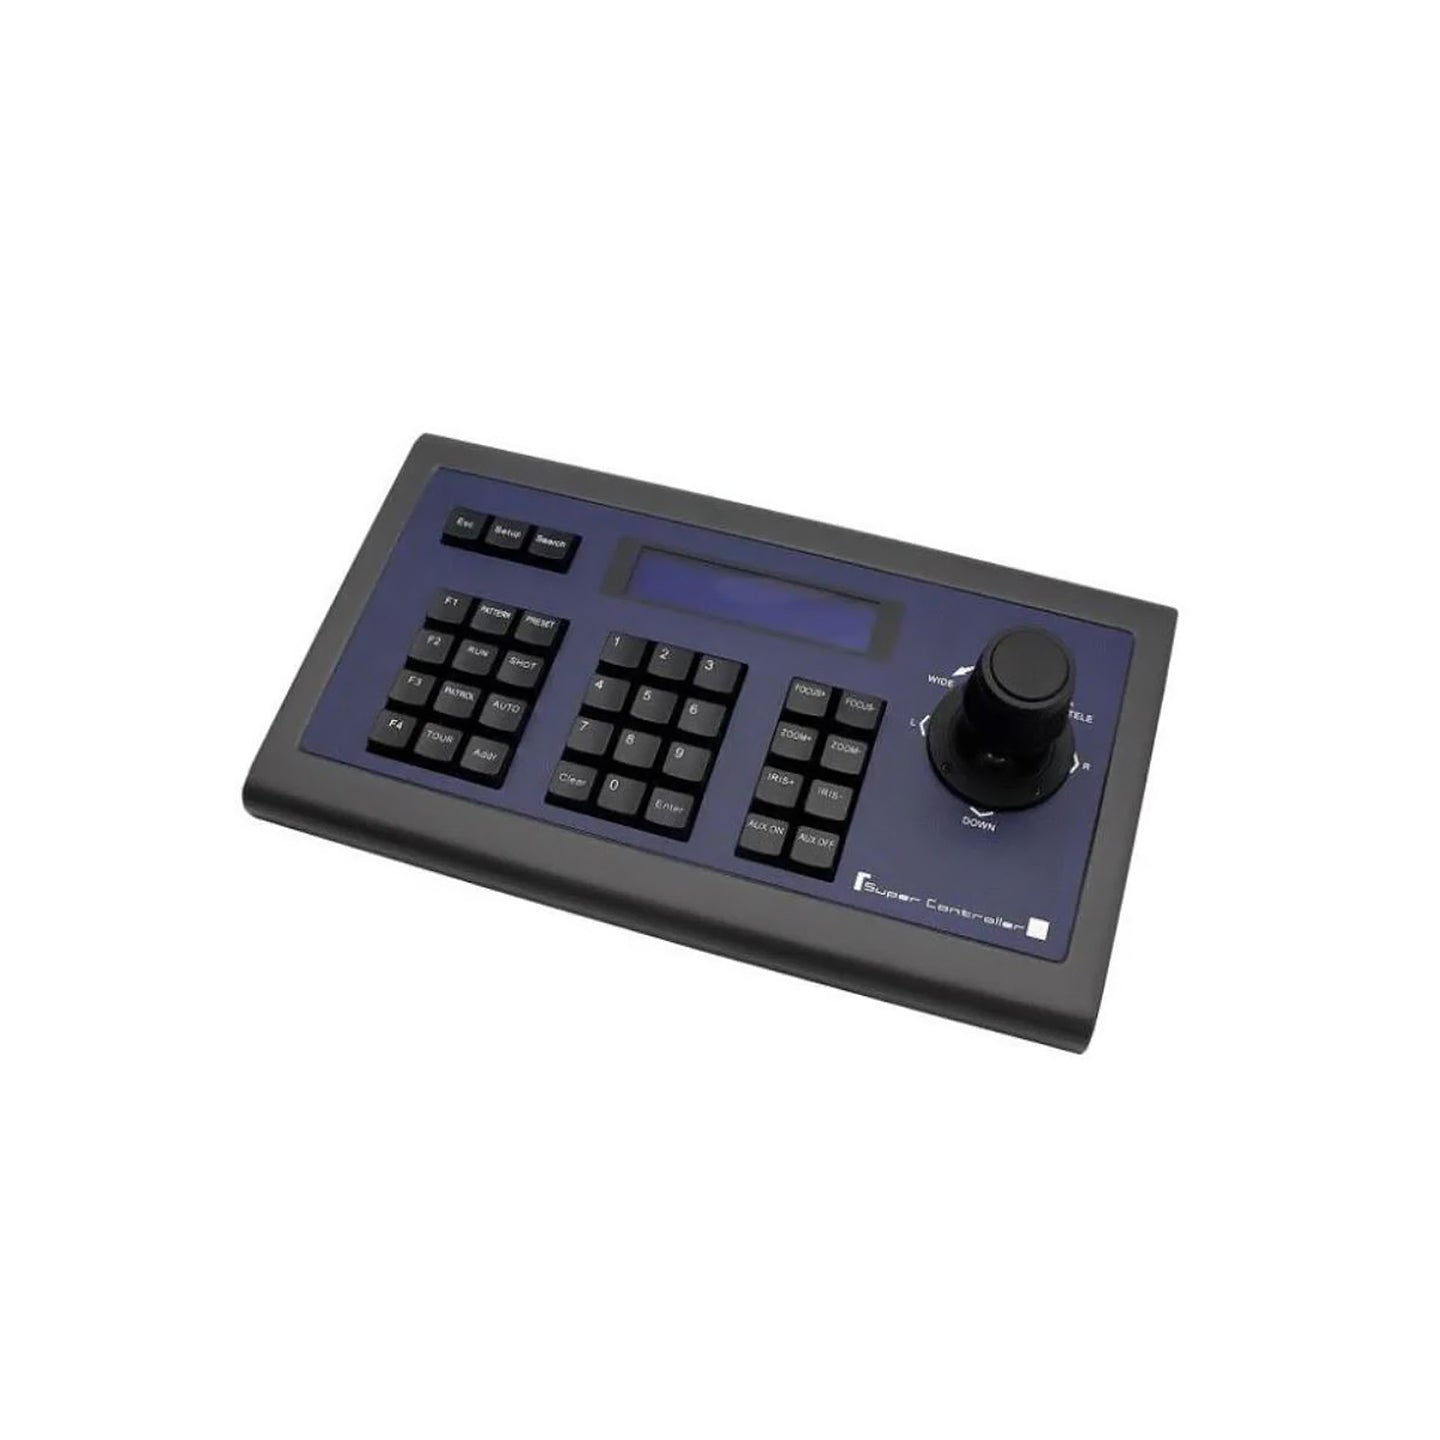 Tenveo KZ1 PTZ Camera Keyboard Controller with LCD Display, Joystick Operation, Pan / Tilt / Zoom Presets for Live Streaming, Video Conferences, Meetings